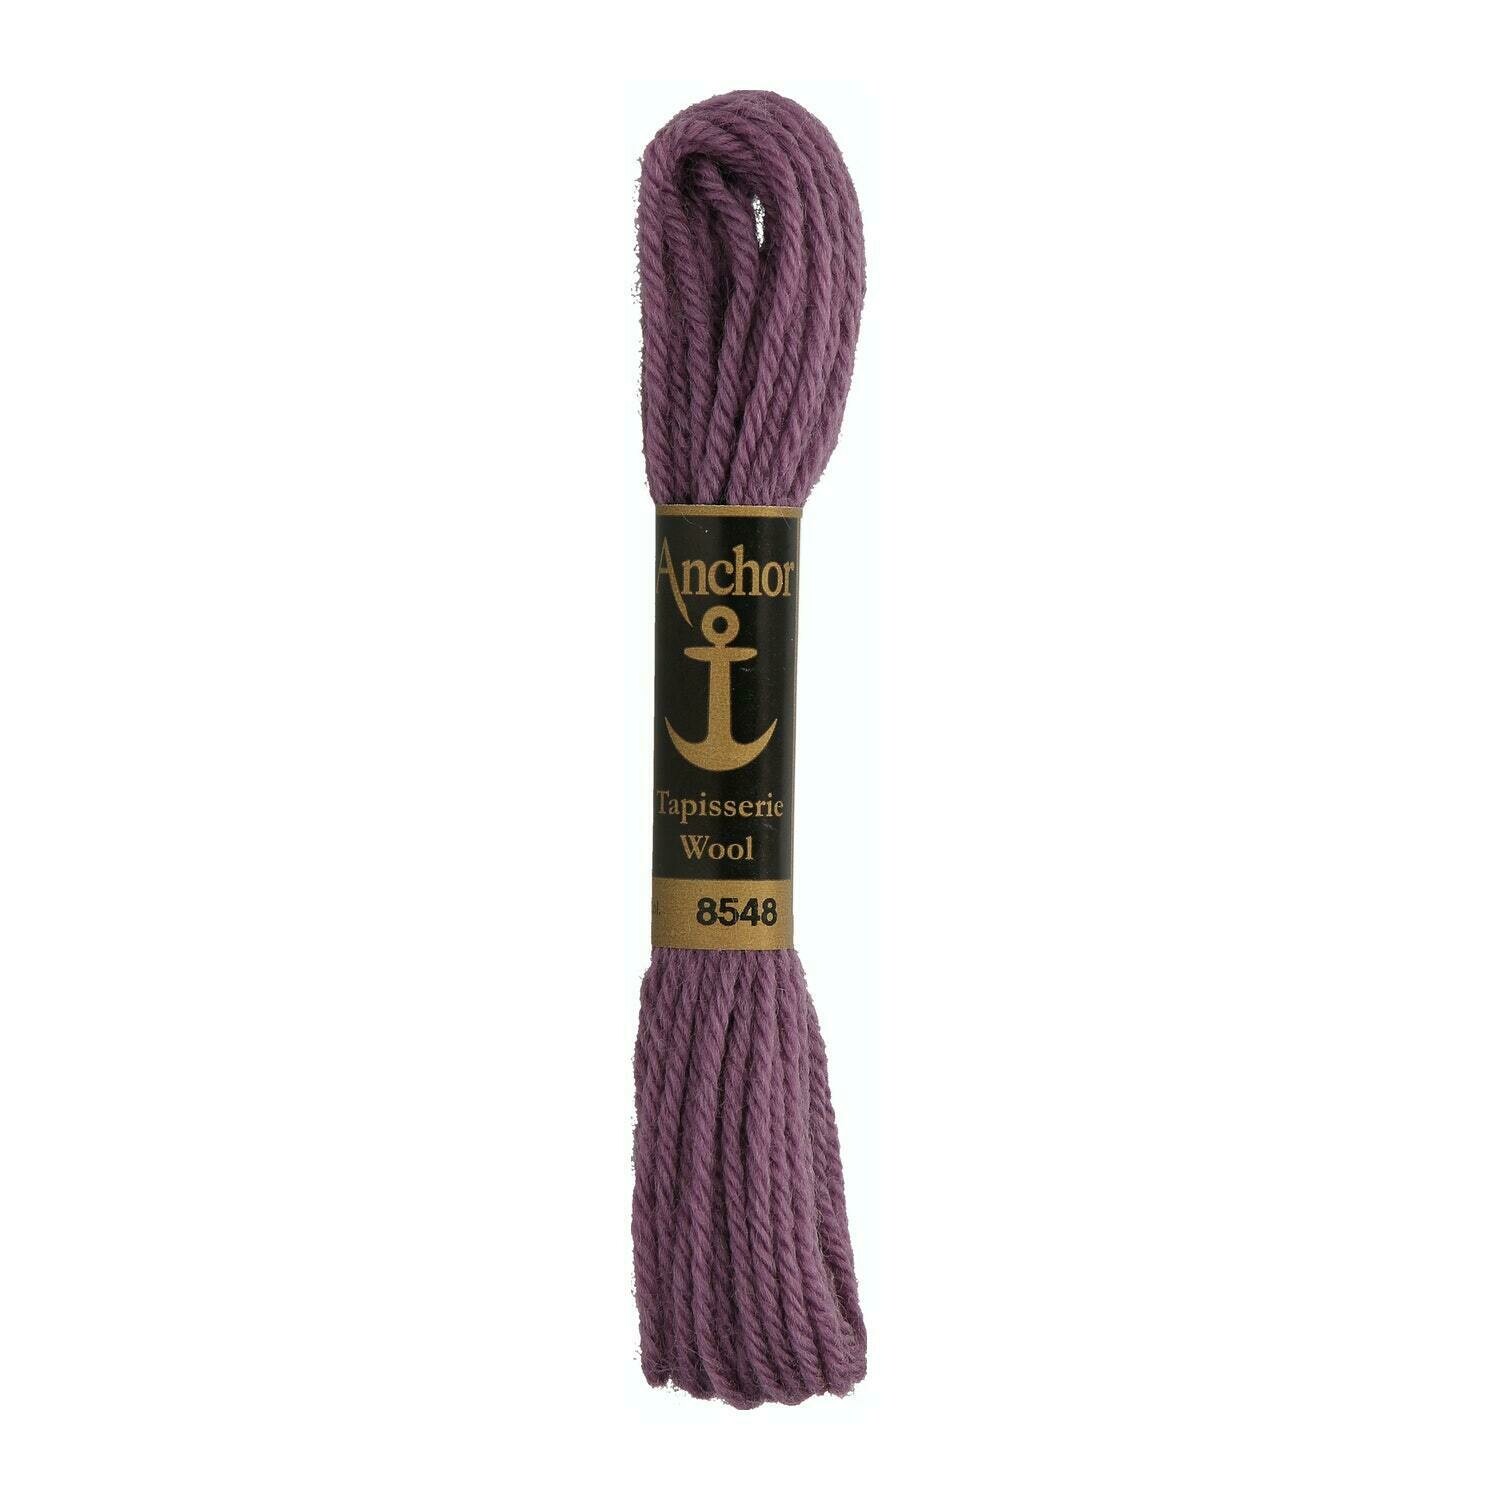 Anchor Tapisserie Wool #08548